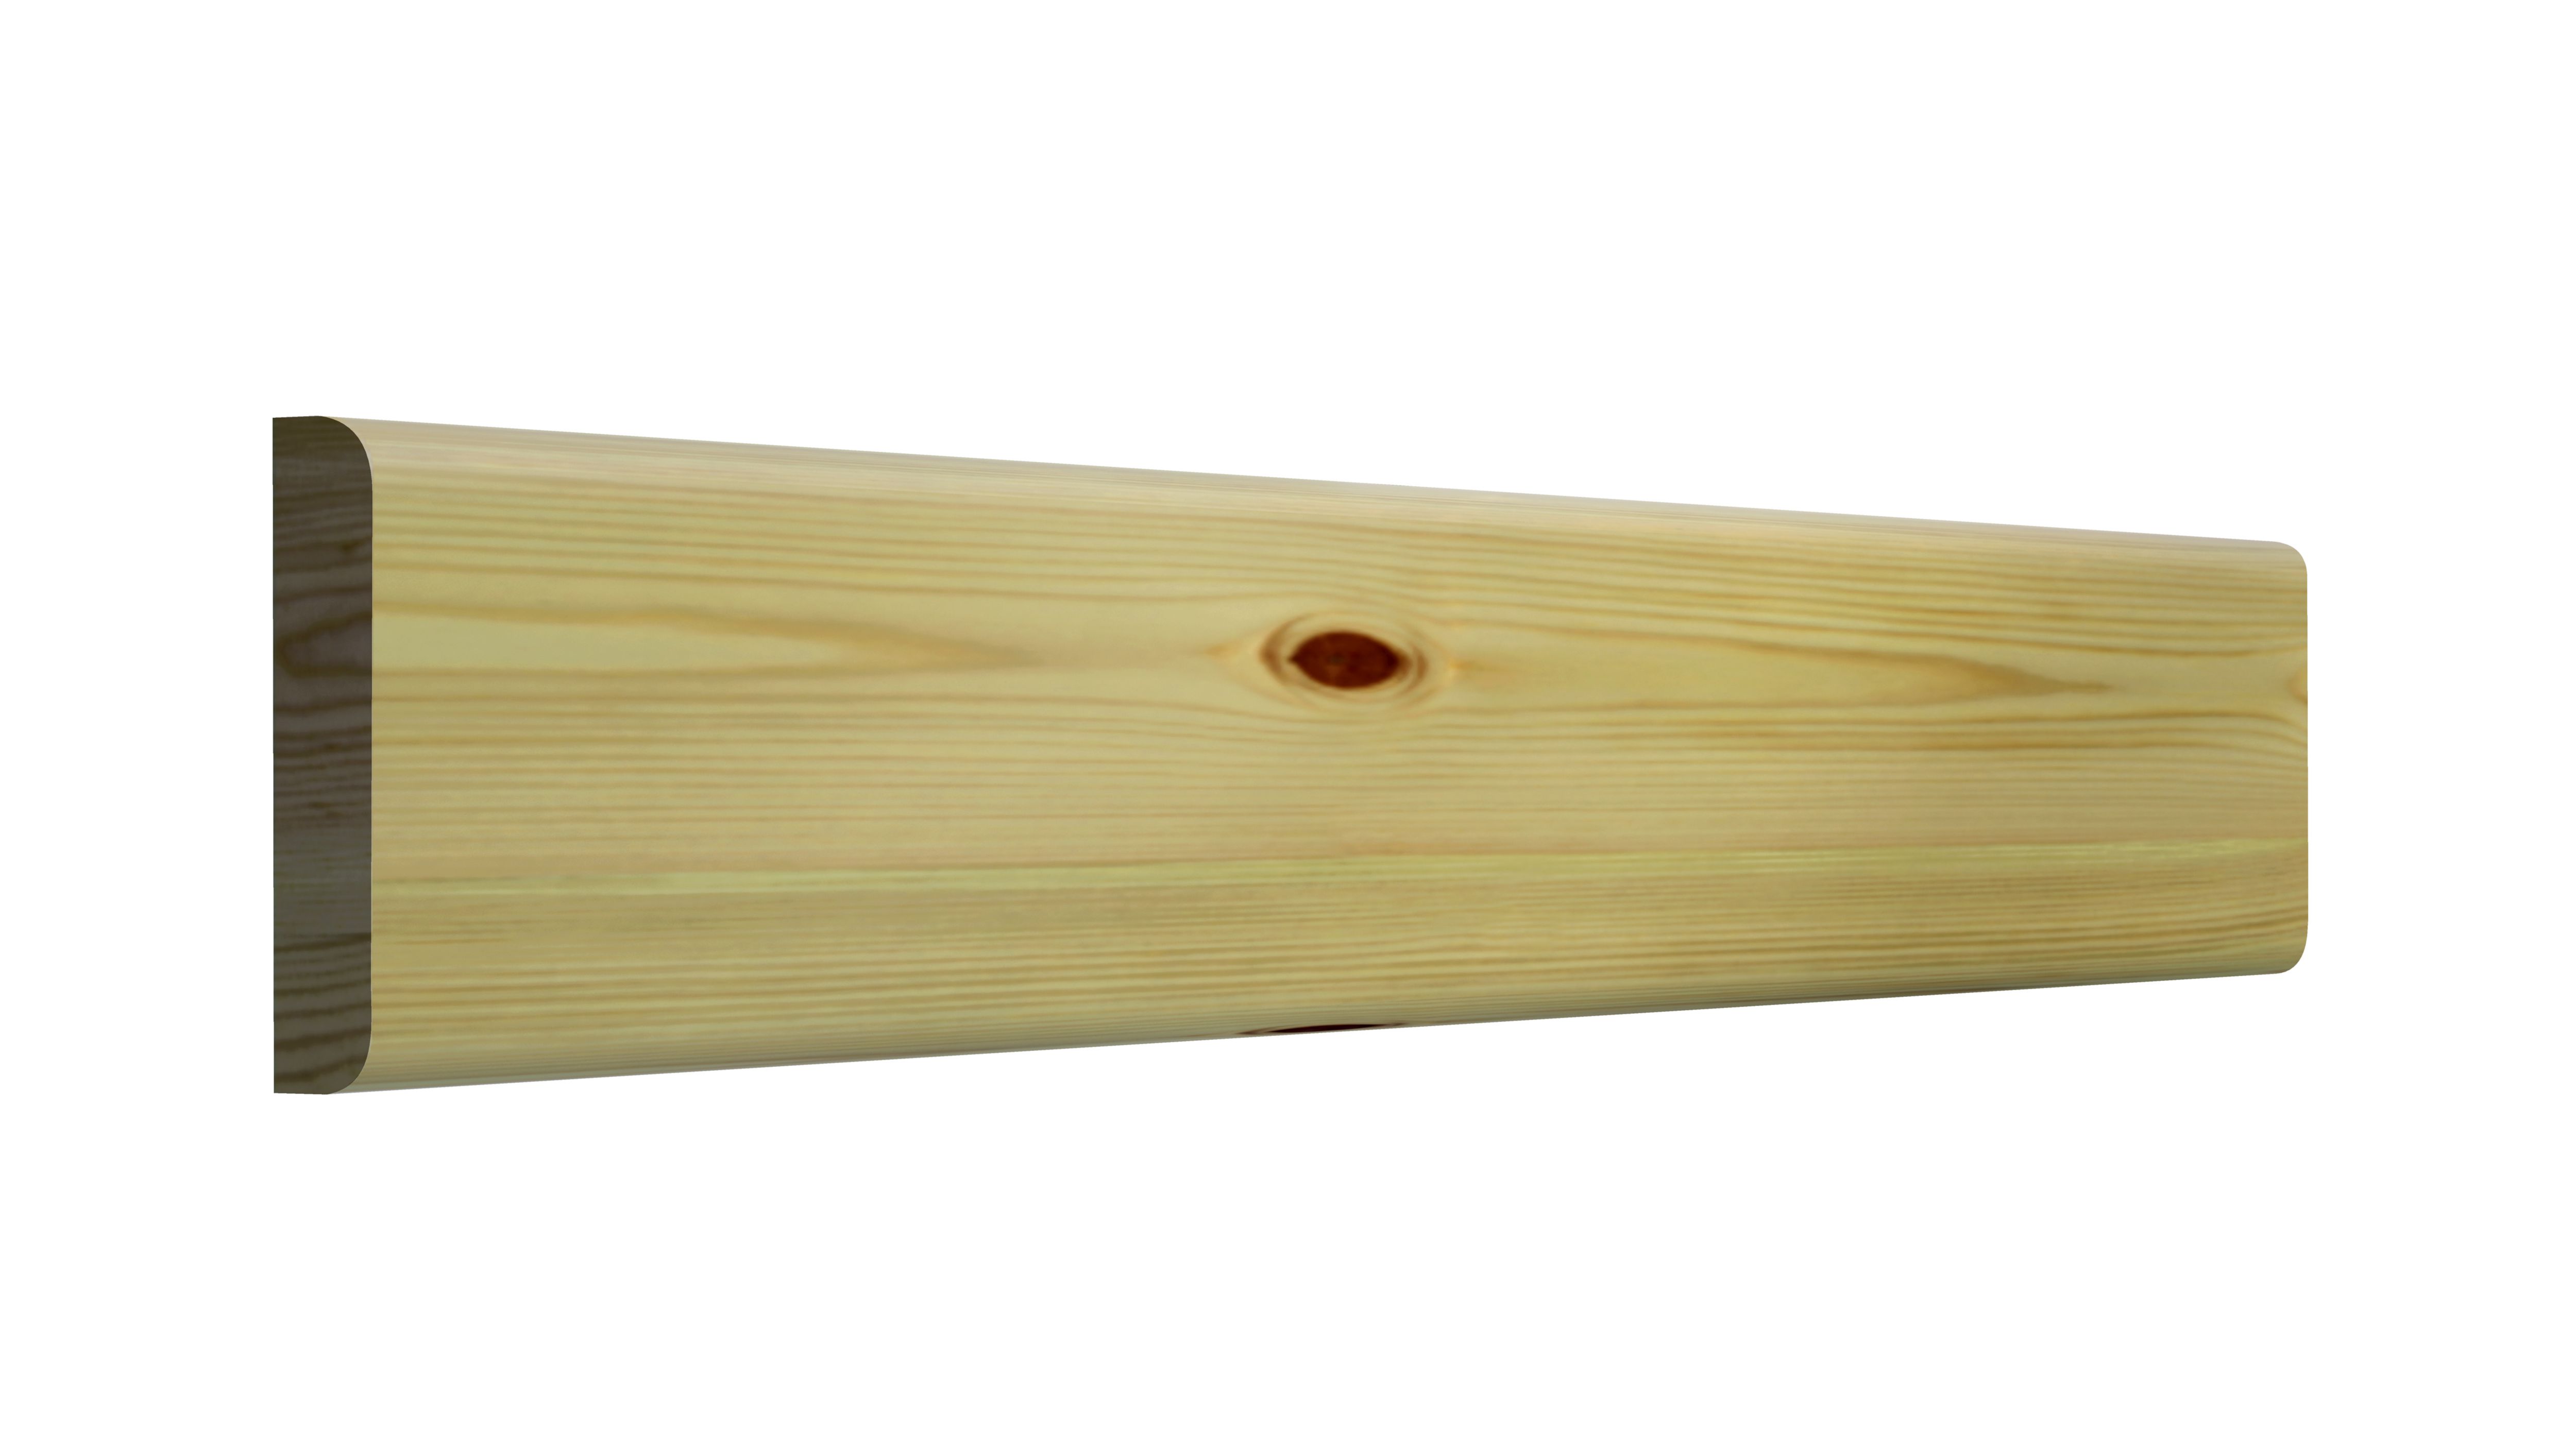 GoodHome Natural Pine Rounded Architrave (L)2.1m (W)69mm (T)12mm